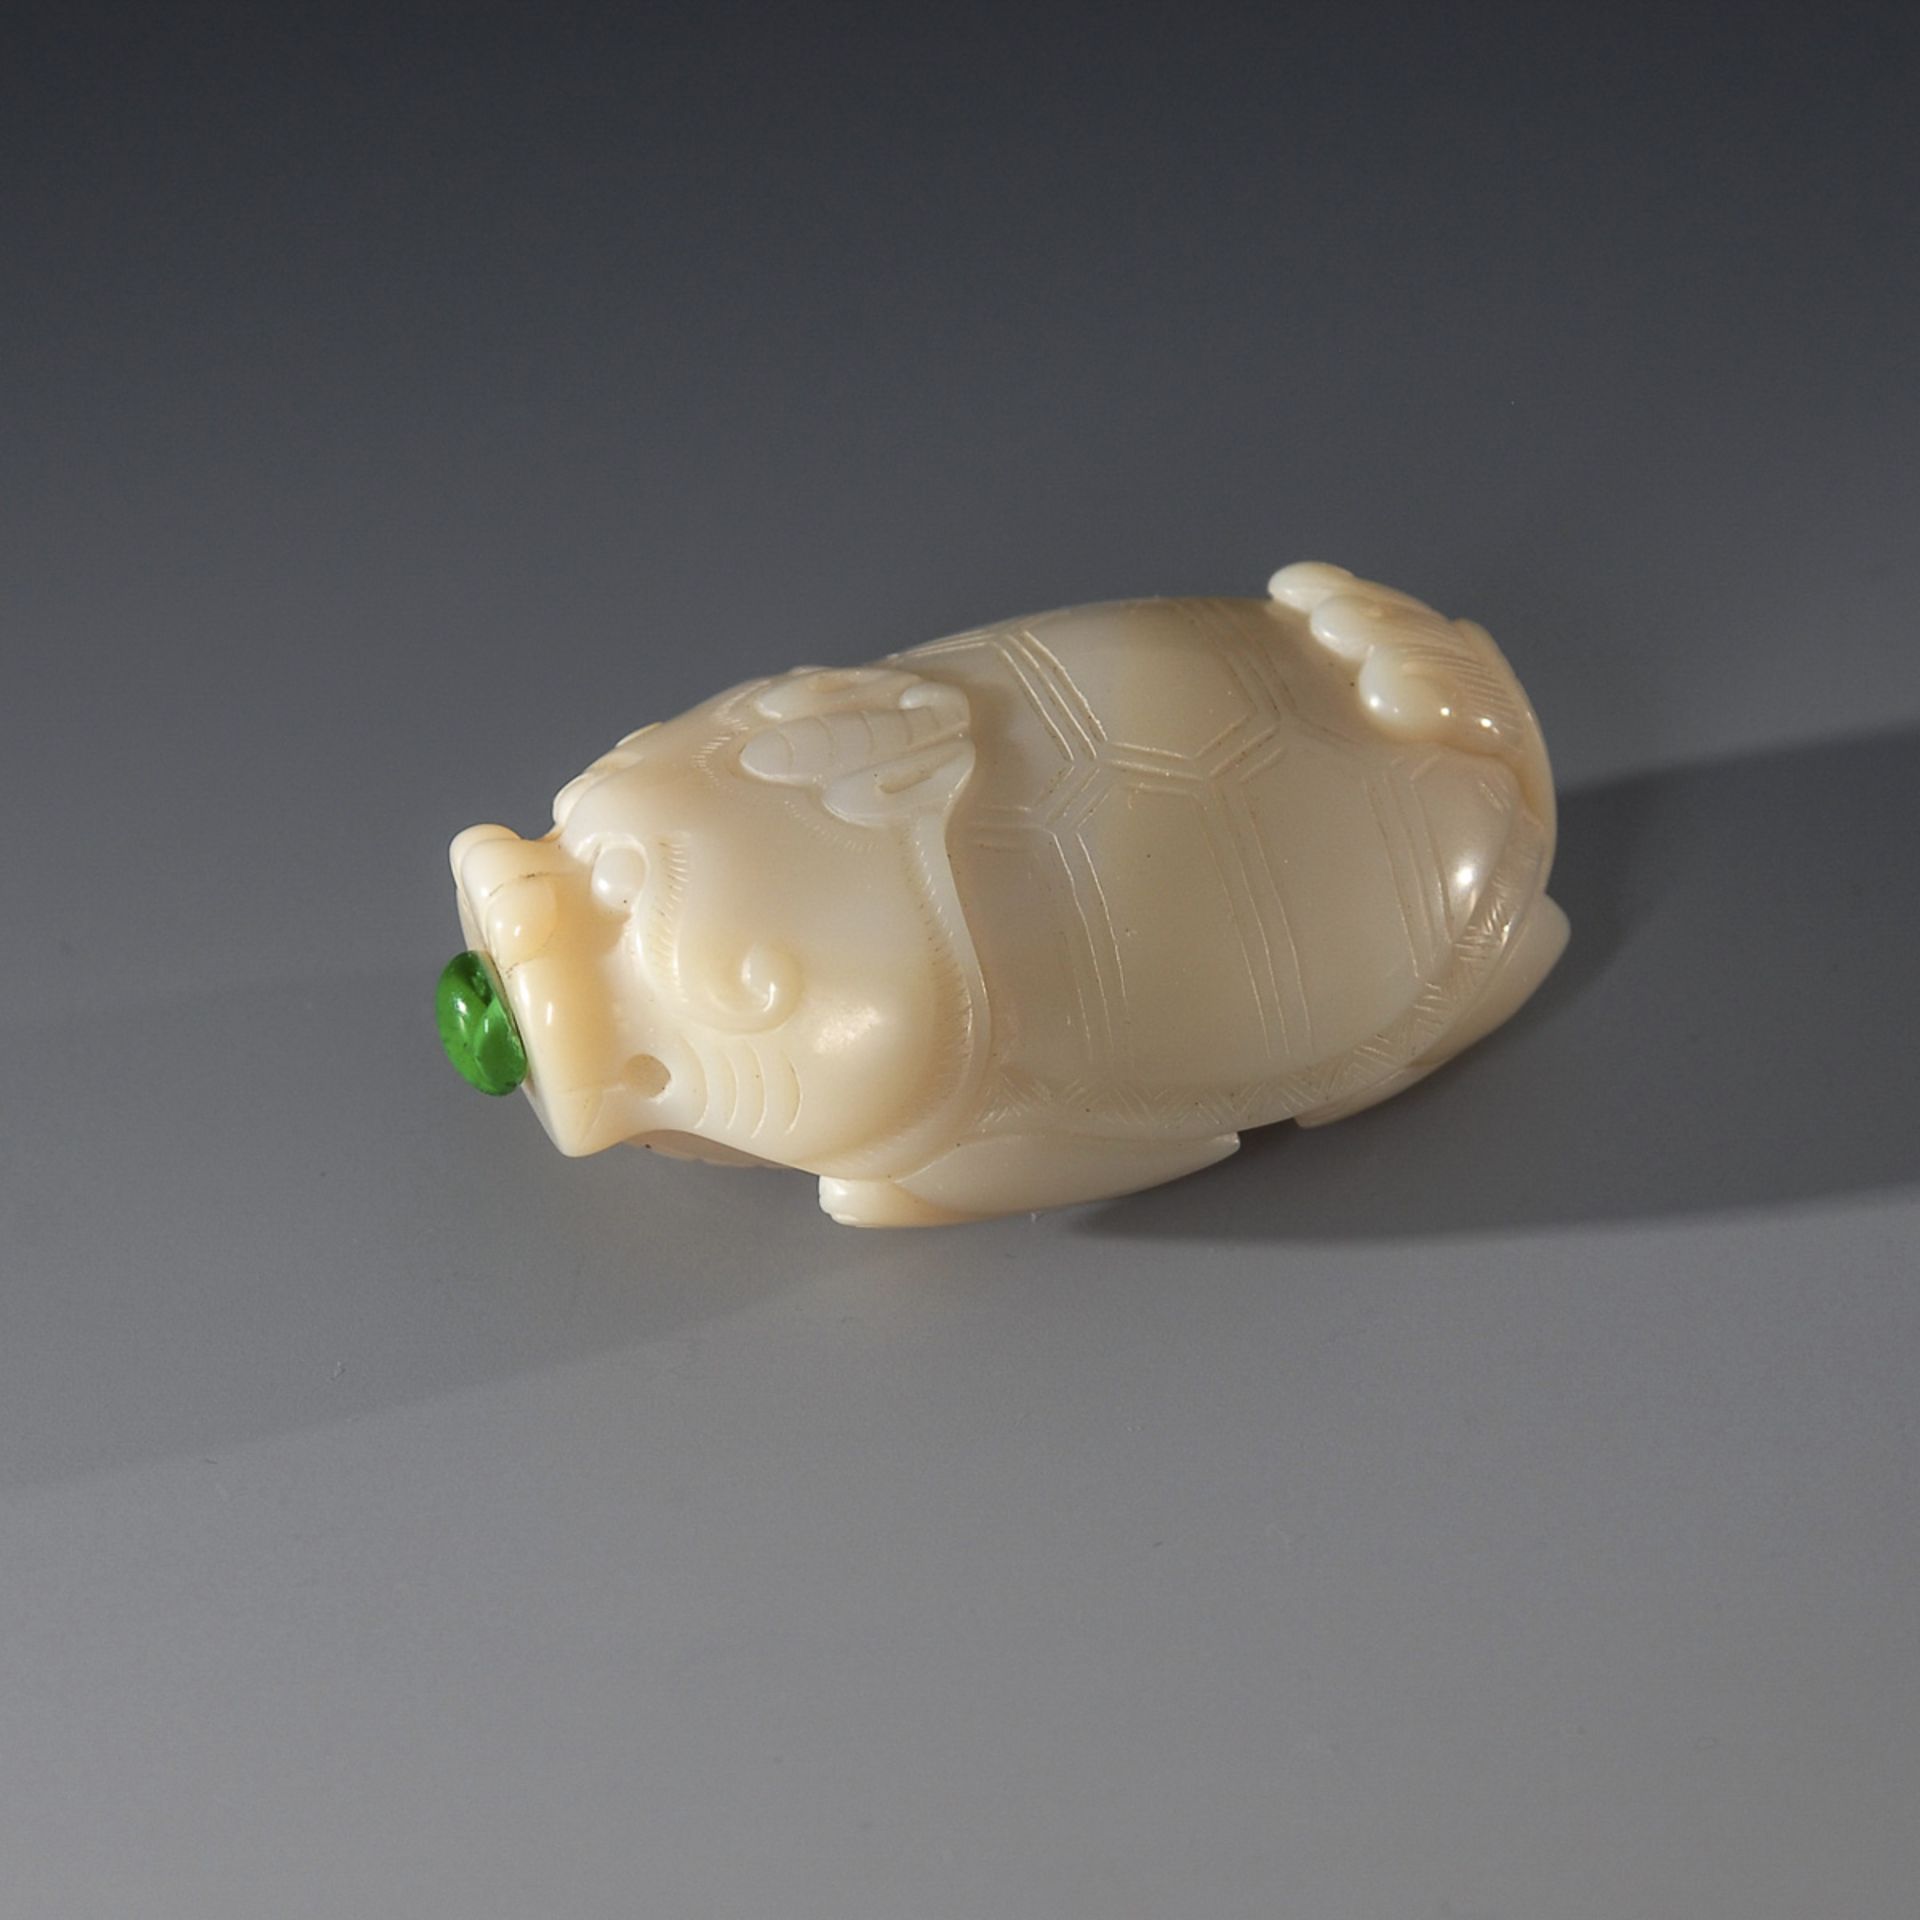 Snuffbottle - Schildkröte, weiße Jade.A Qing Dynasty White Jade Snuffbottle in the Shape of a - Image 2 of 4